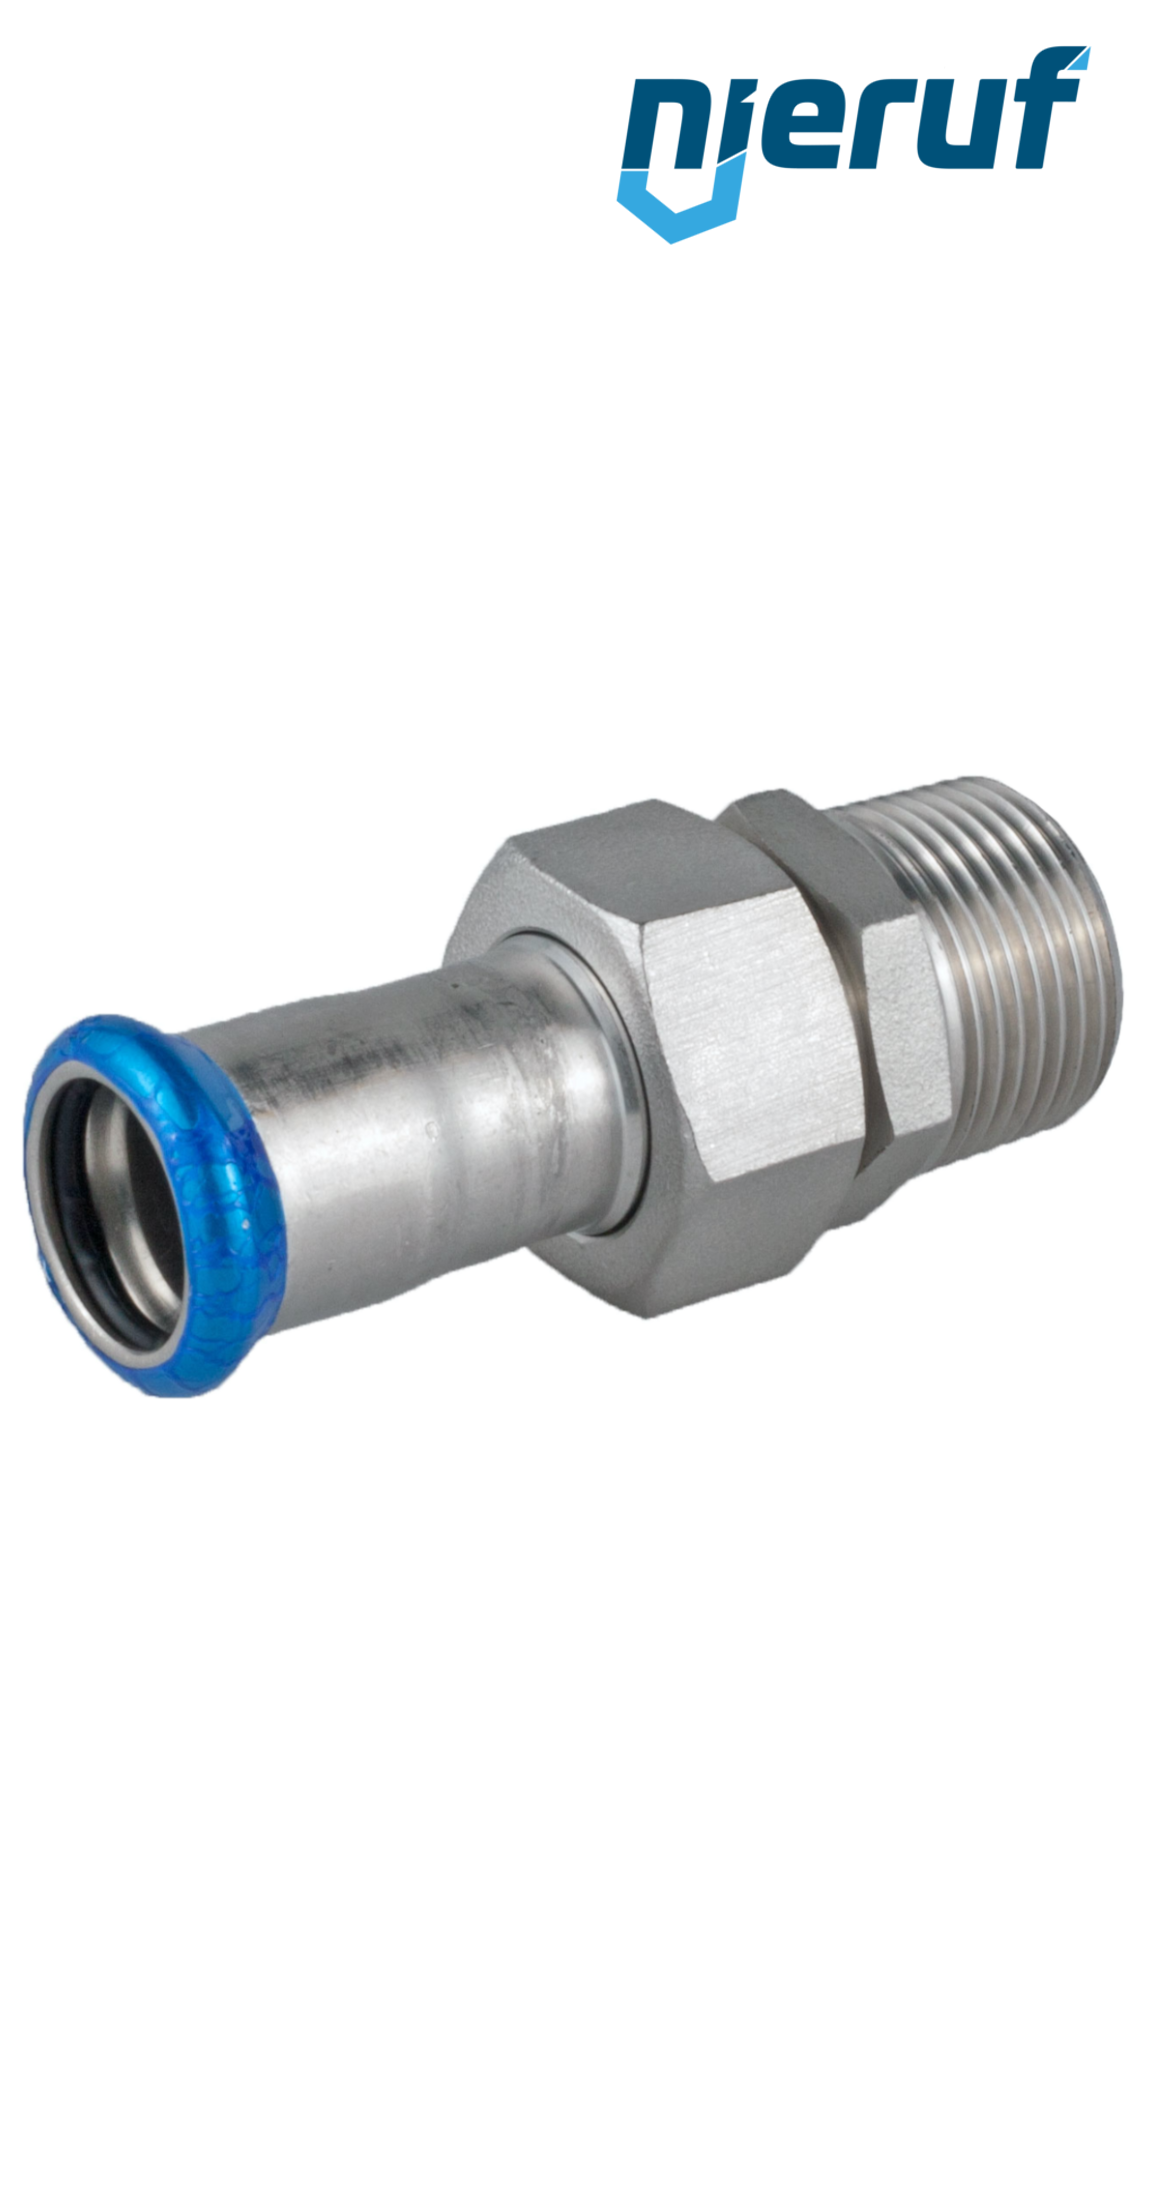 Union Coupling Pressfitting F DN40 - 42,0 mm male thread 1 1/2" inch stainless steel